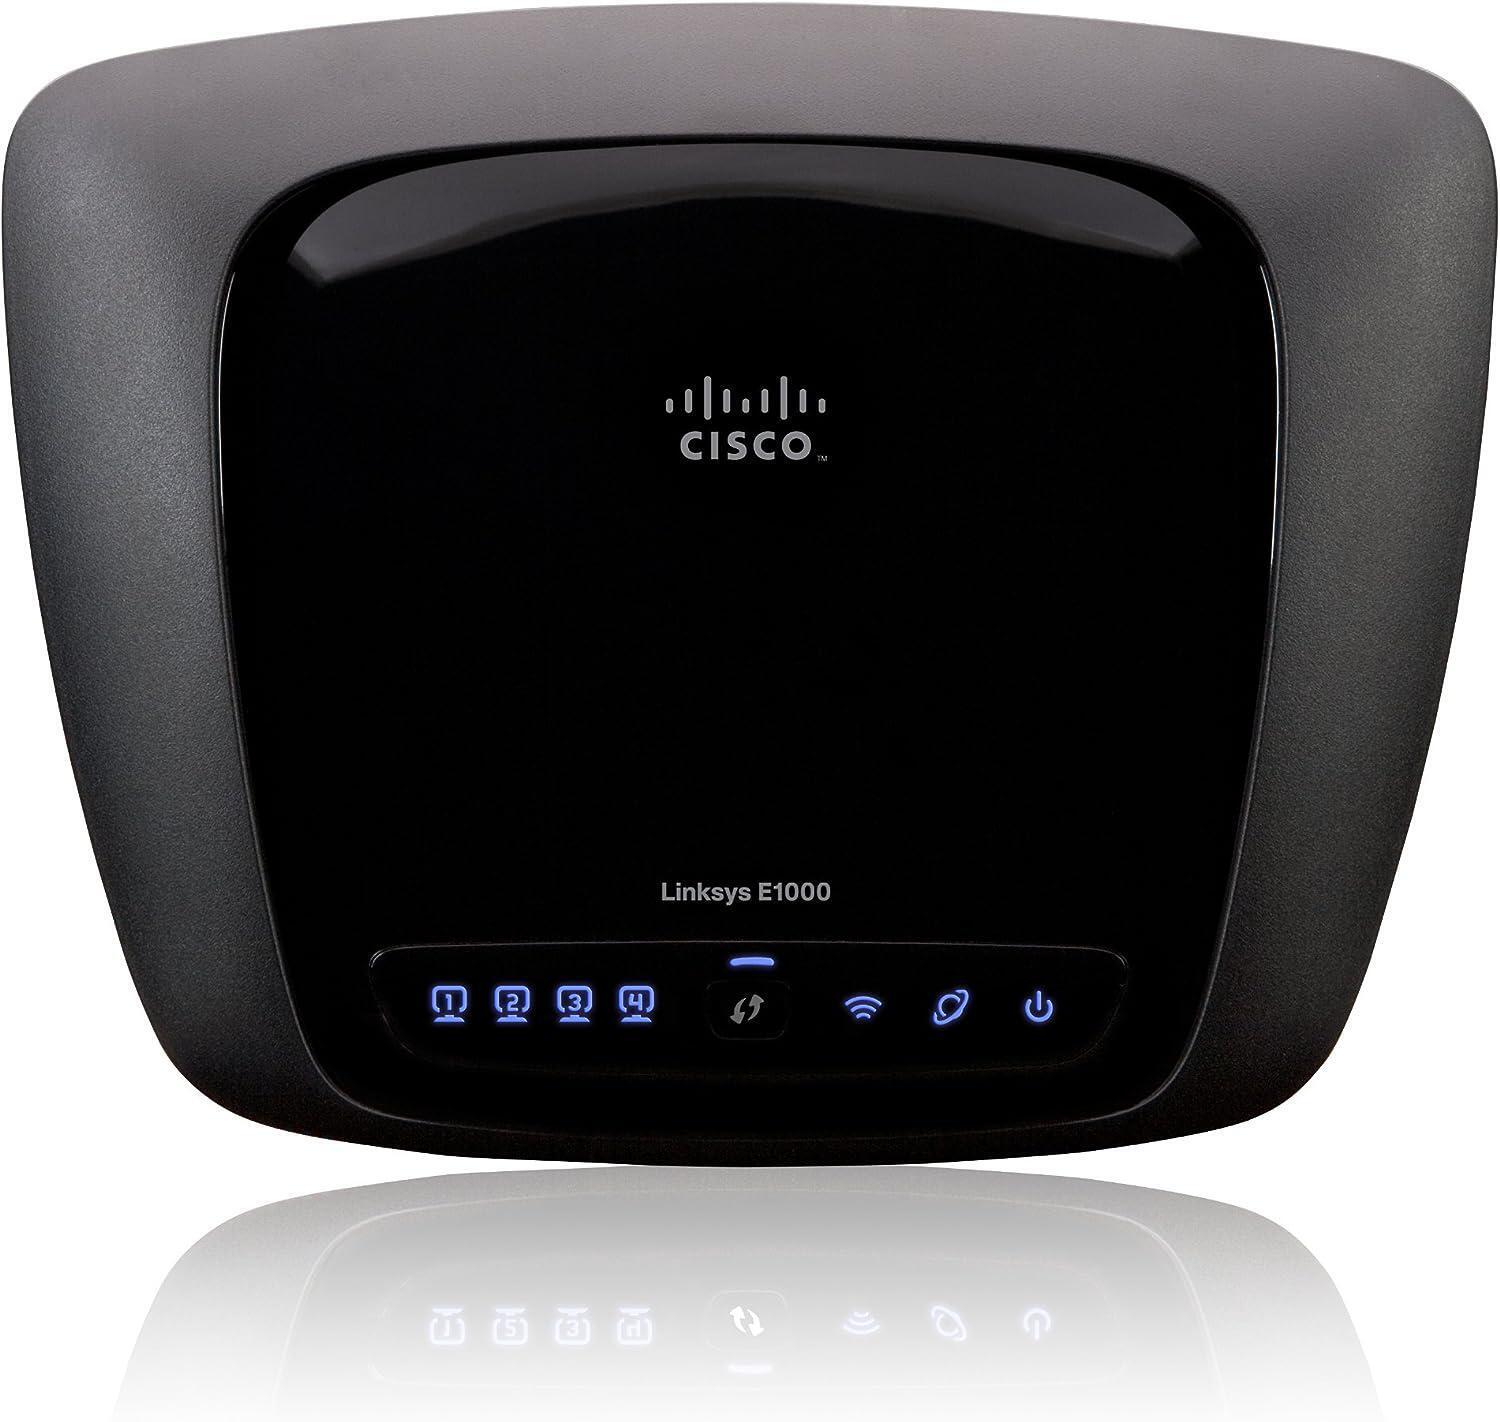 Linksys Cisco-Linksys E1000 Wireless-N Router Gaming Console, Personal Computer